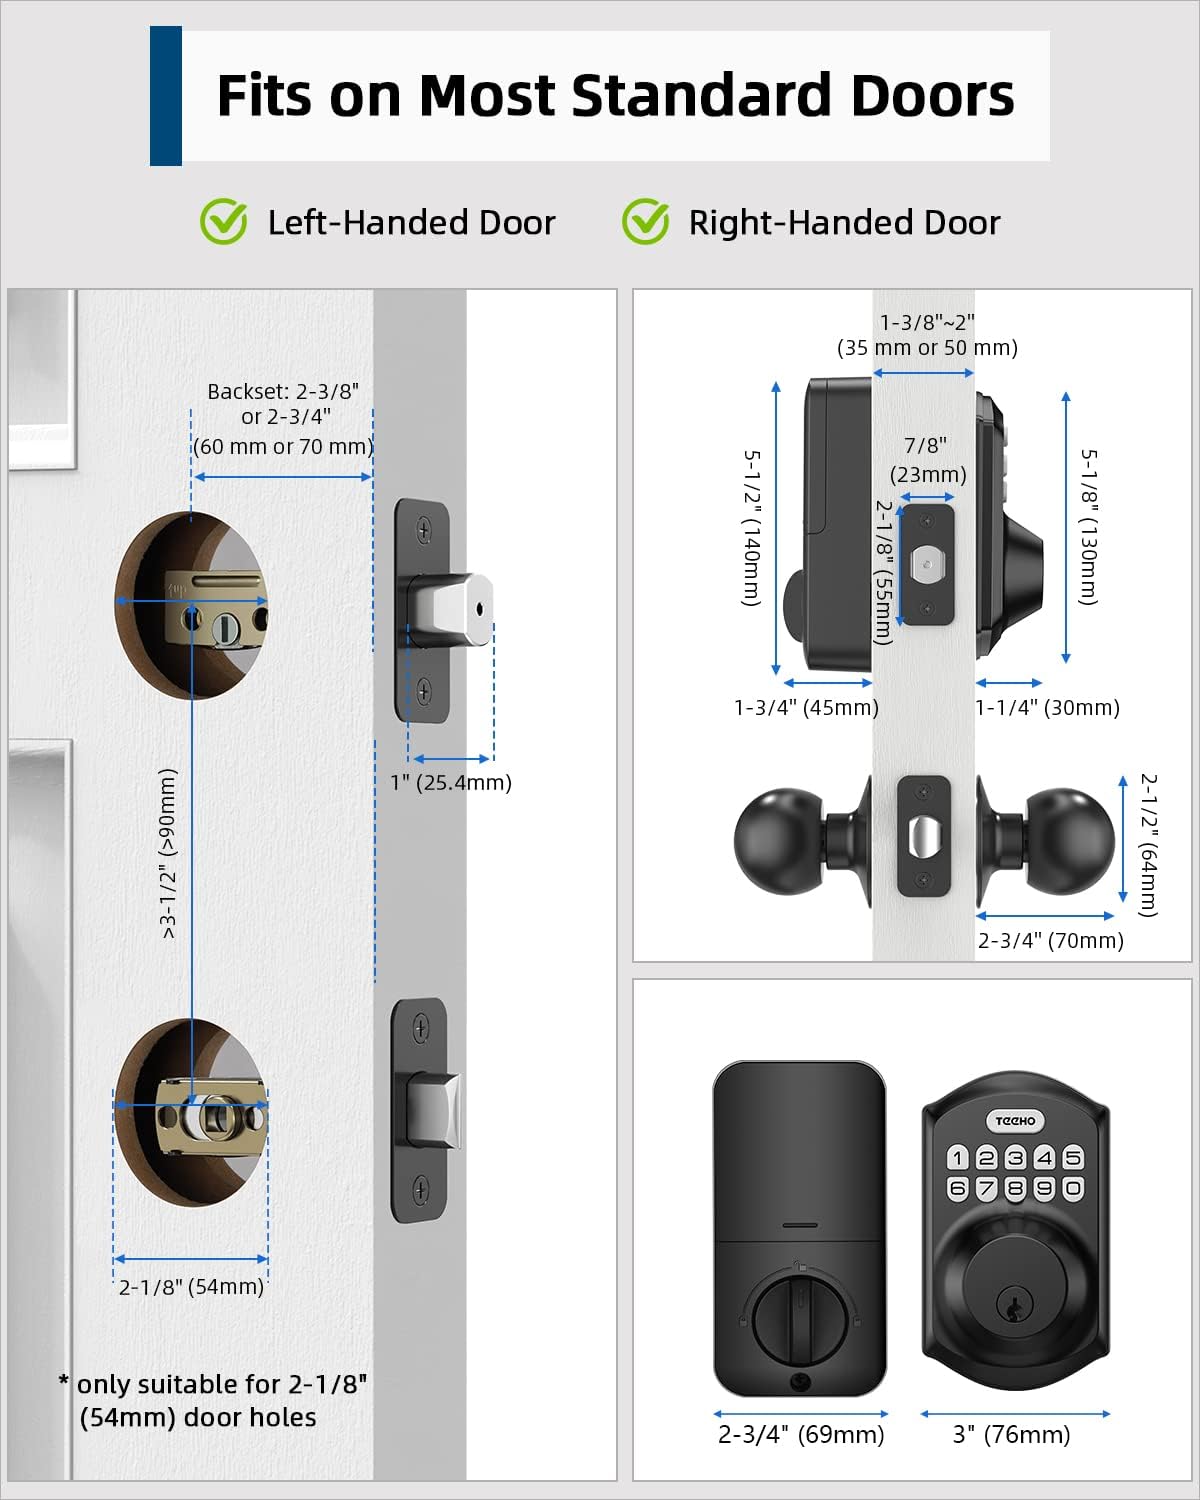 TEEHO TE001K Keyless Entry Door Lock: The Ultimate Solution for Convenient and Secure Home Access